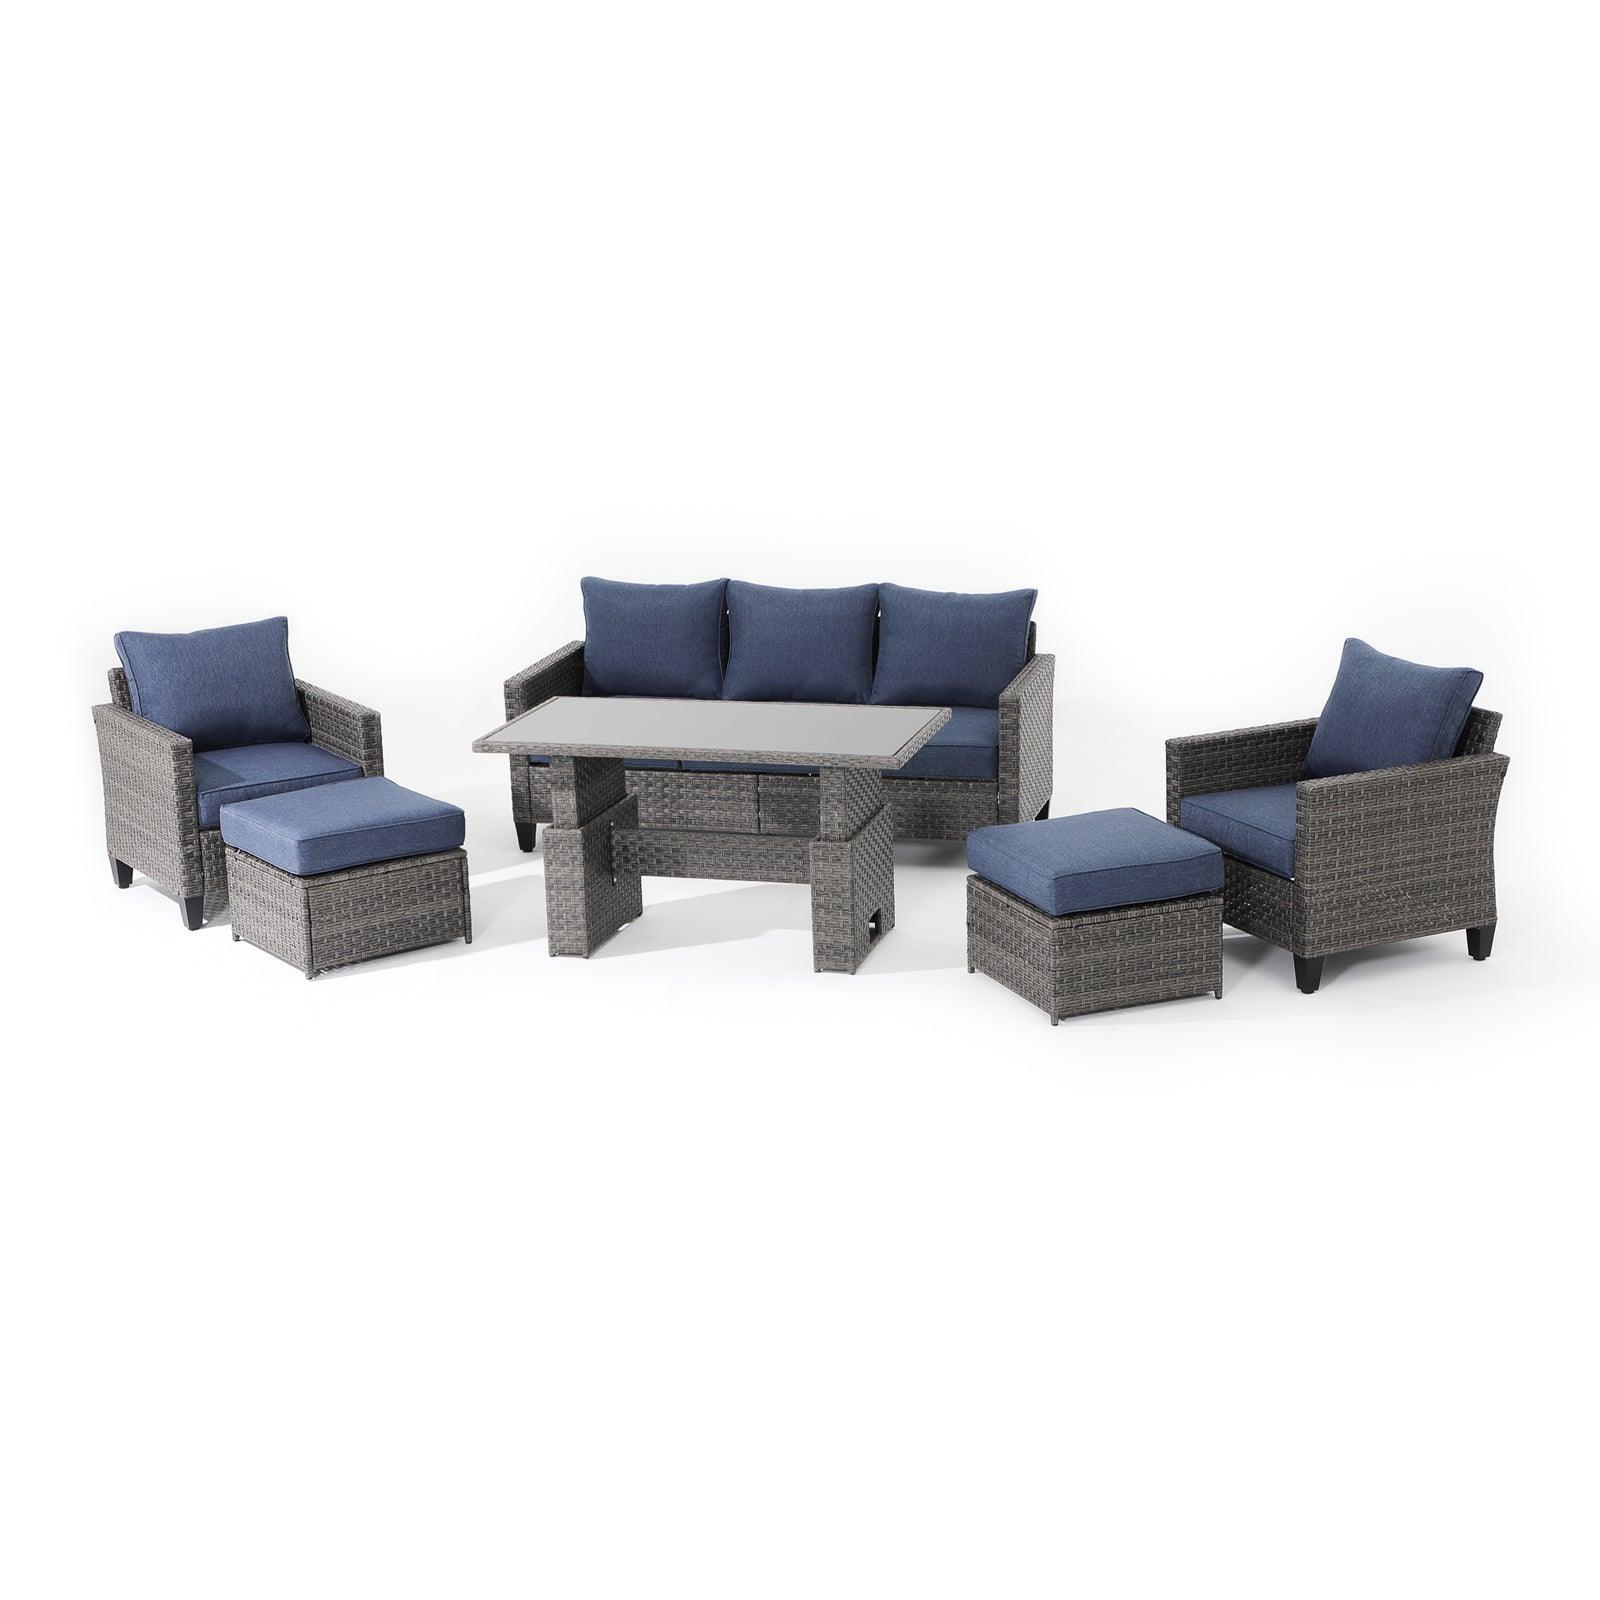 Ayia 6-Piece outdoor Sofa Set with Rattan design, Navy Blue cushions, a 3-seater sofa, 2 arm chairs , 2 ottomans, 1 multifunctional outdoor table - Jardina Furniture #color_Navy blue#piece_6-pc. with ottomans & Table